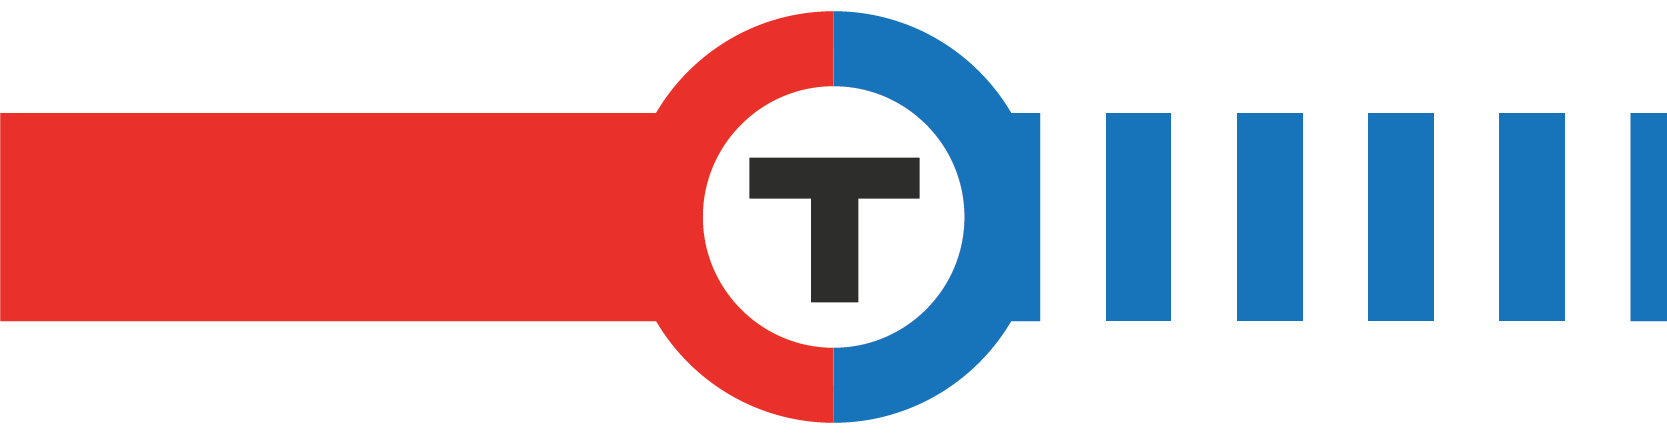 Red Blue Connector Transitmatters